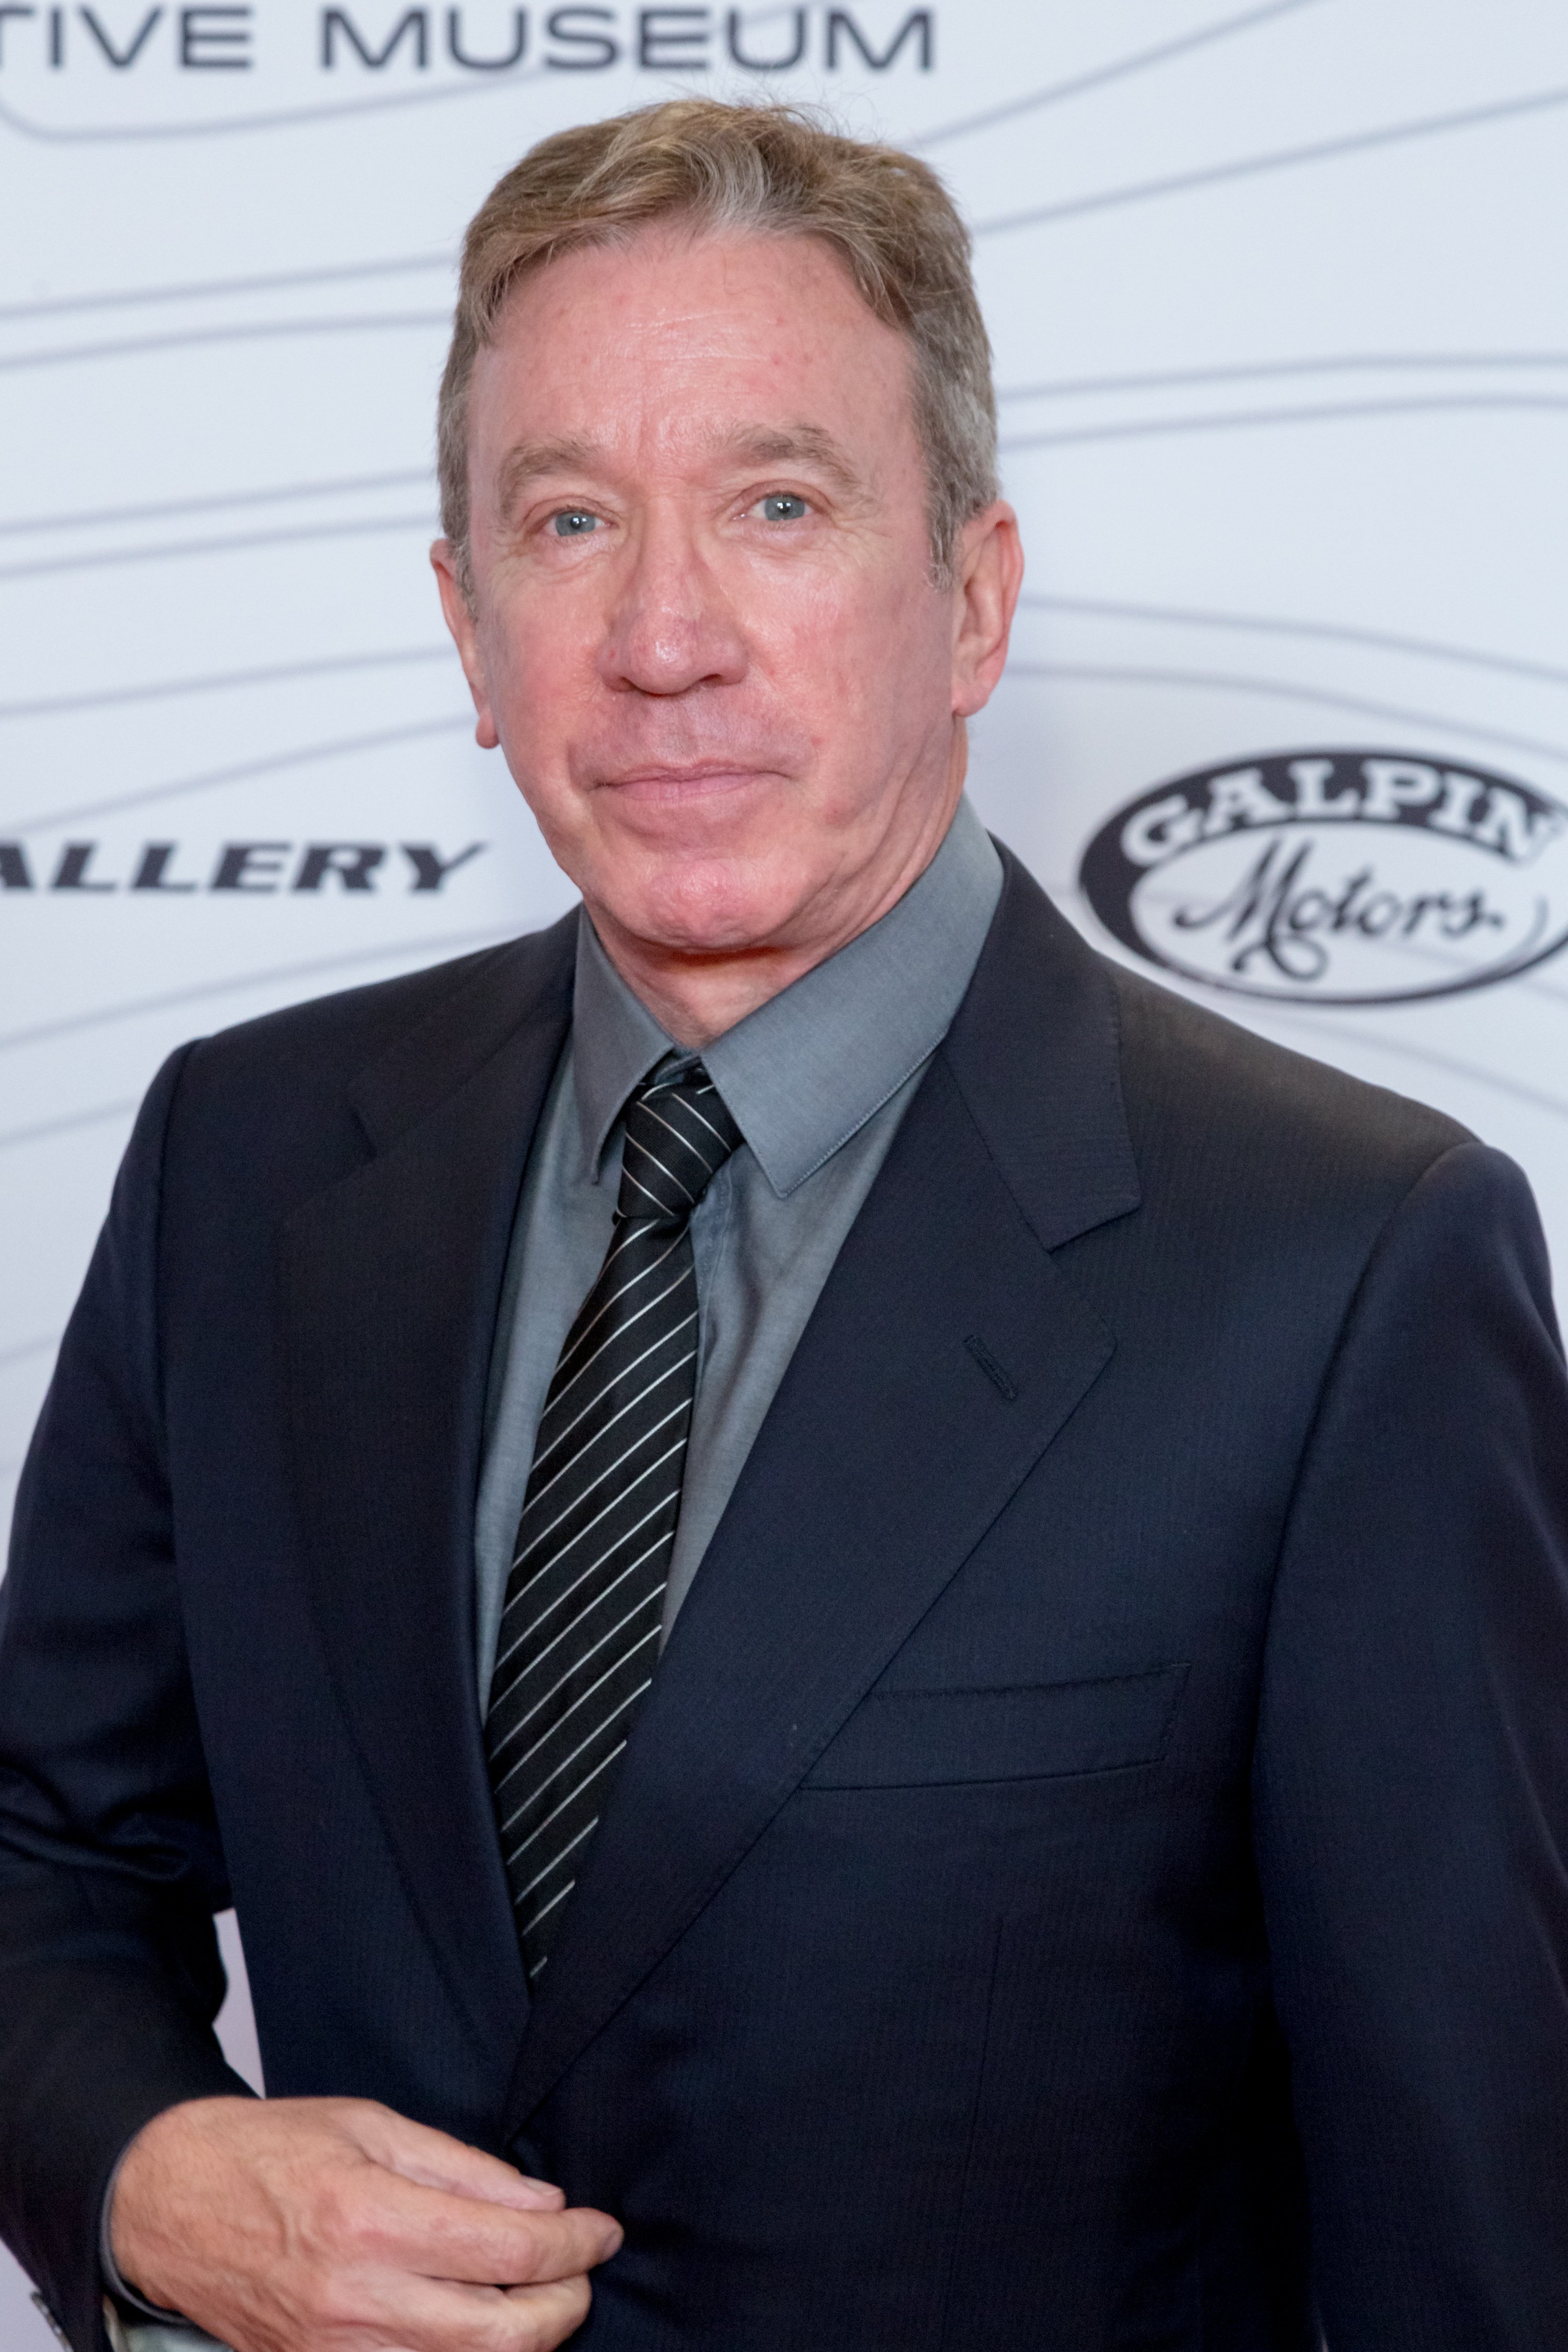 Actor Tim Allen at Petersen Automotive Museum on October 22, 2016 in Los Angeles, California | Source: Getty Images